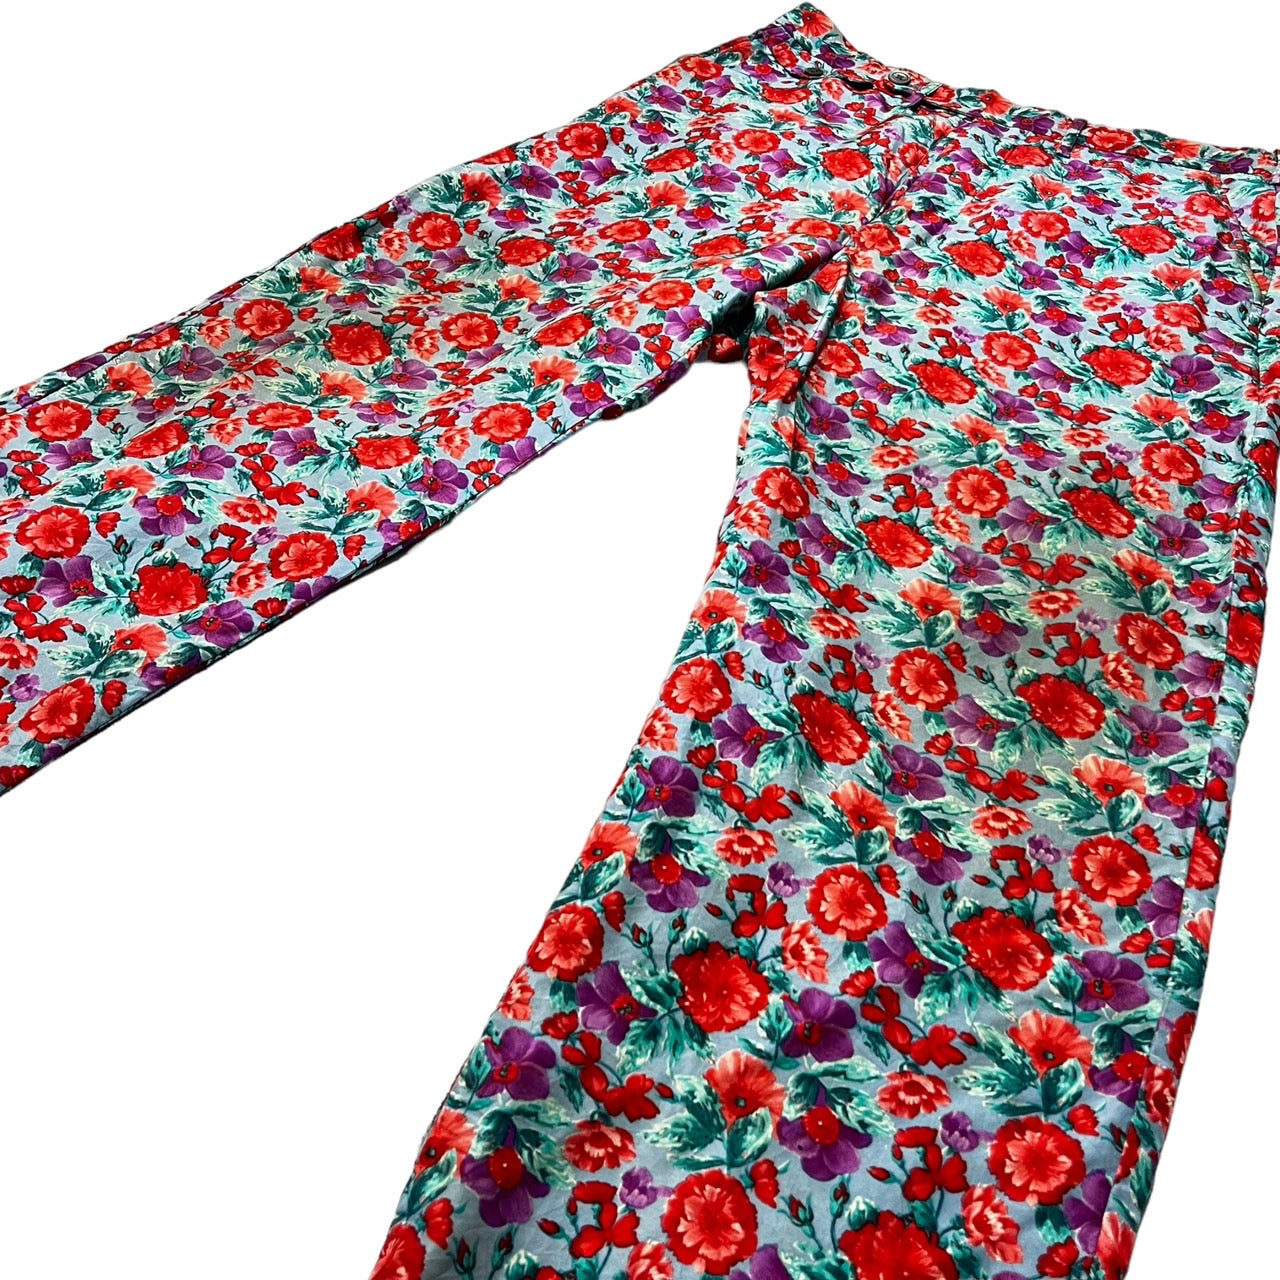 YOHJI YAMAMOTO POUR HOMME(ヨウジヤマモトプールオム) 01SS floral all-over pattern silk slacks/フローラル総柄シルクスラックス/00s/アーカイブ/archives HX-P07-412 SIZE 2(M) レッド×ライトブルー 01SS COLLECTION LOOK #029着用アイテム/稀少品